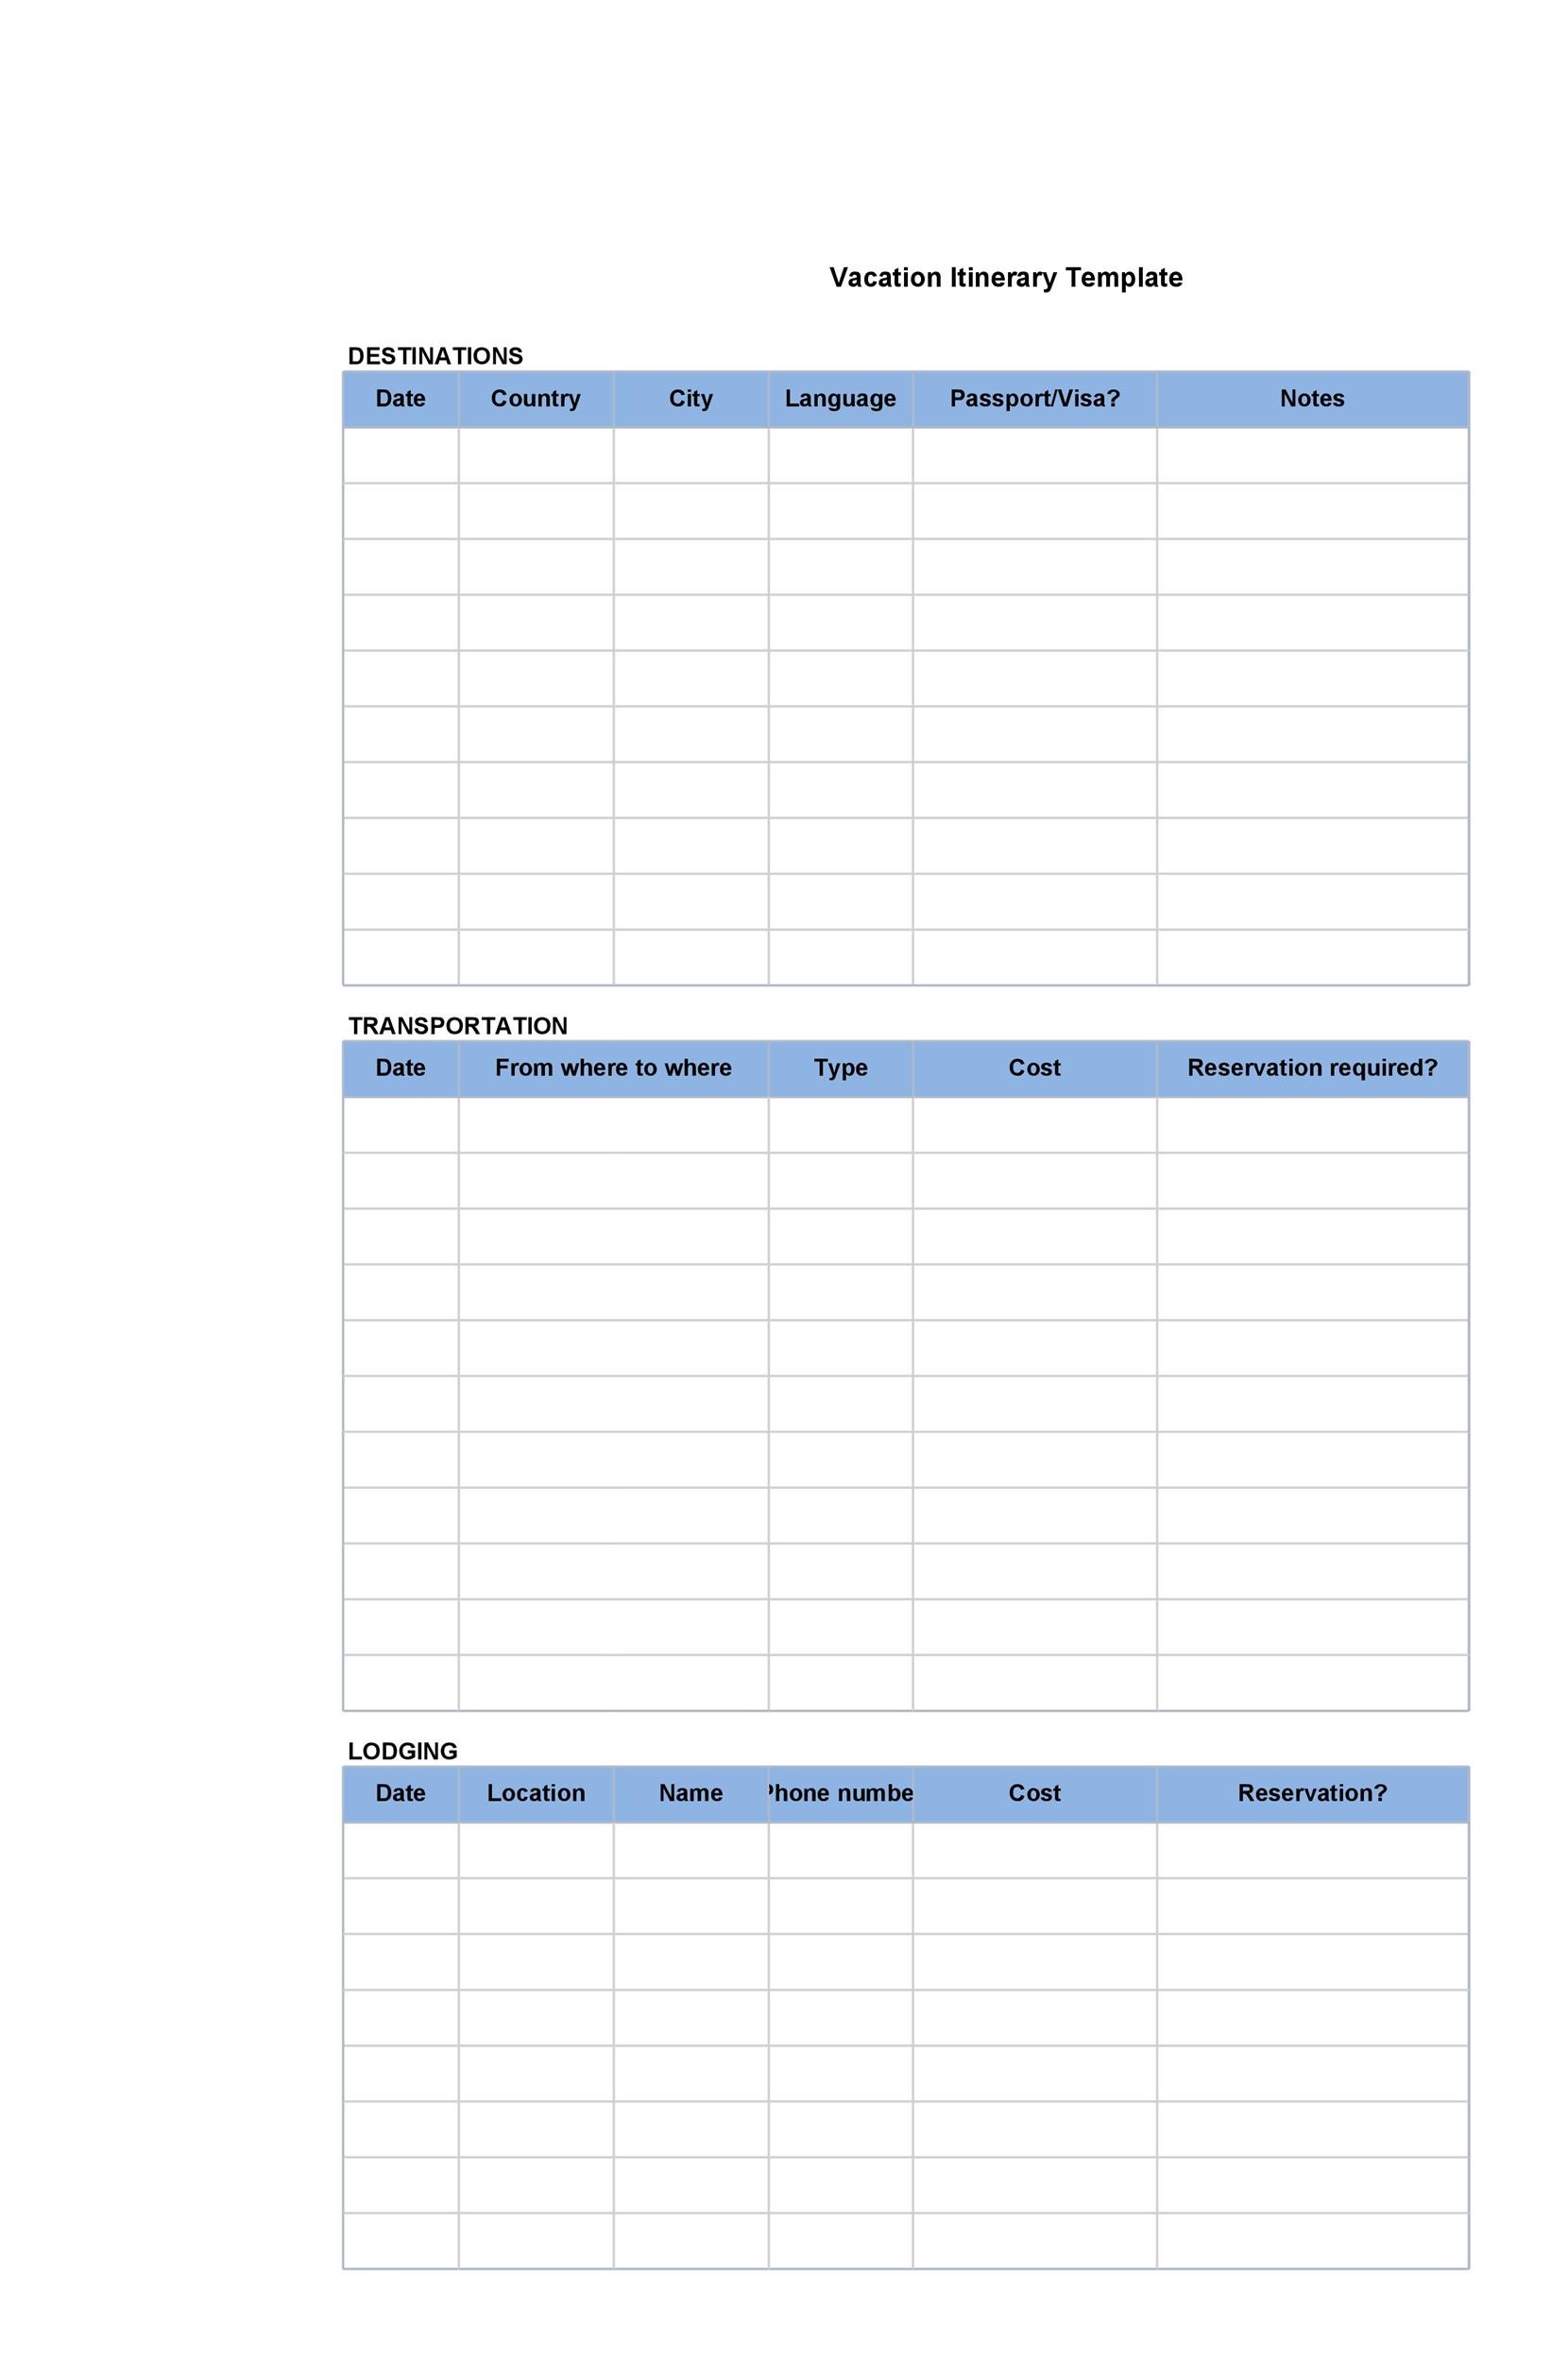 Vacation Itinerary Template Word from templatelab.com